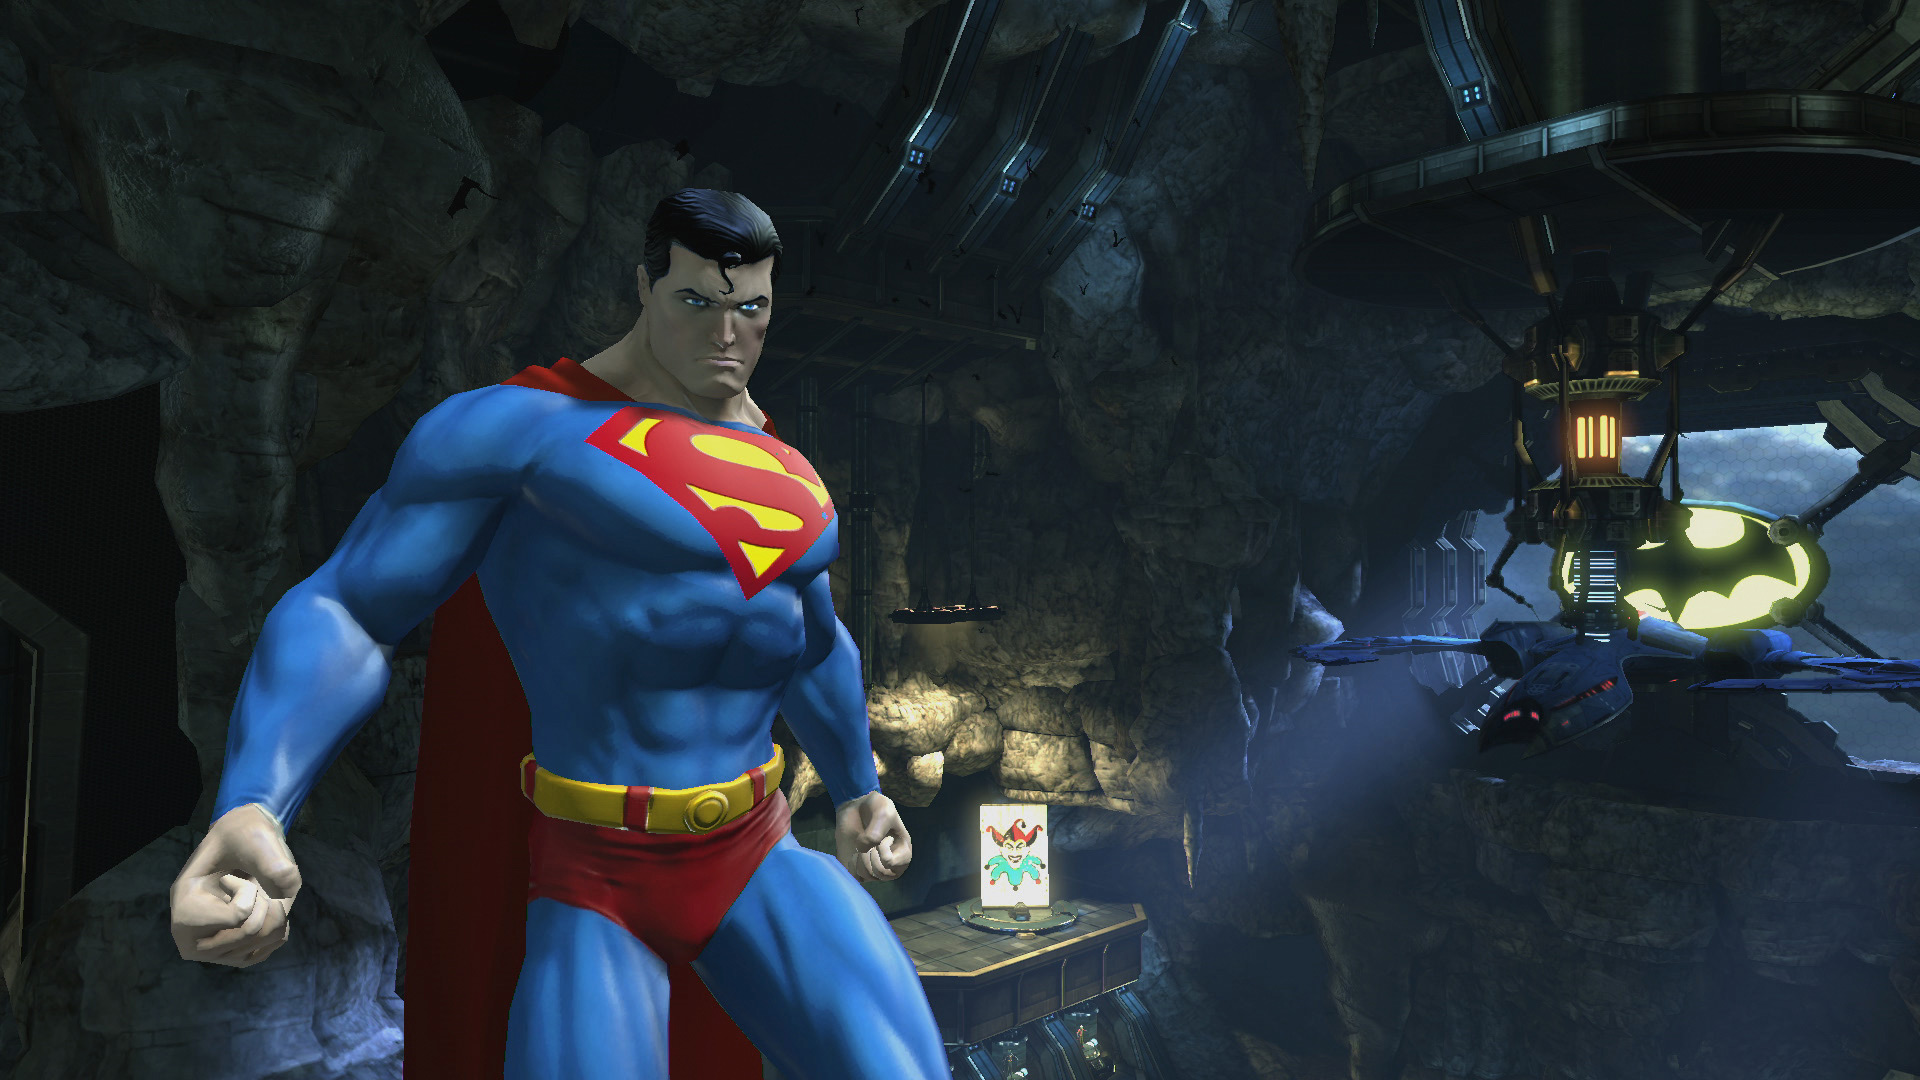 Amazing DC Universe Online Pictures & Backgrounds